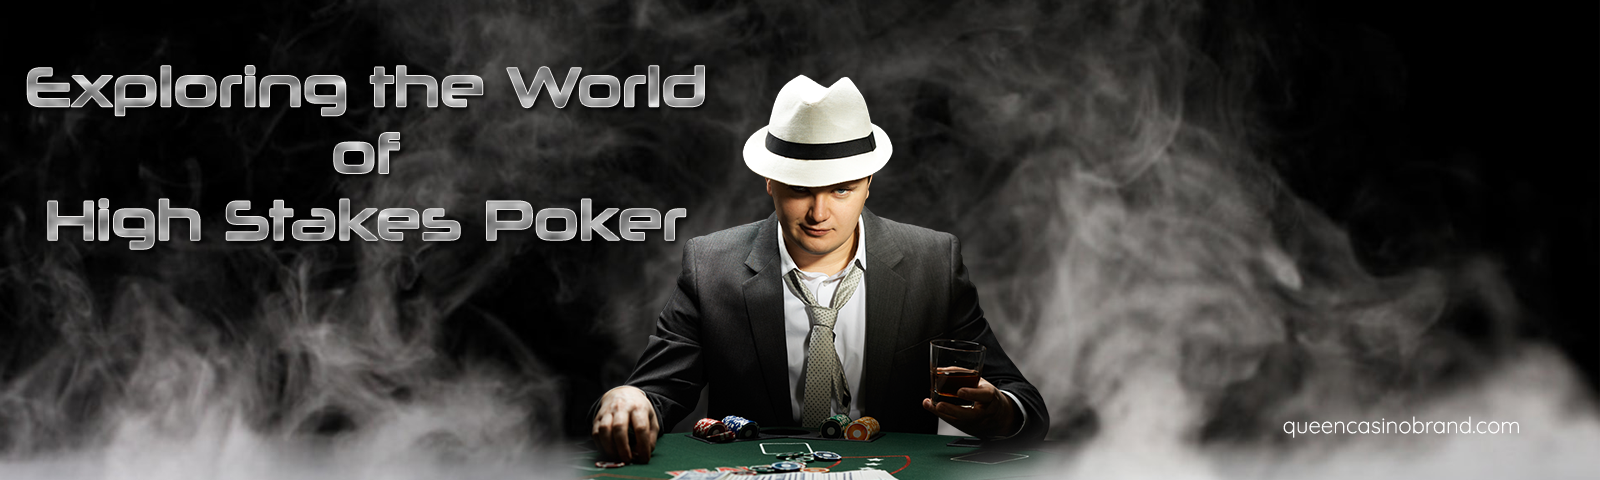 Exploring the World of High Stakes Poker